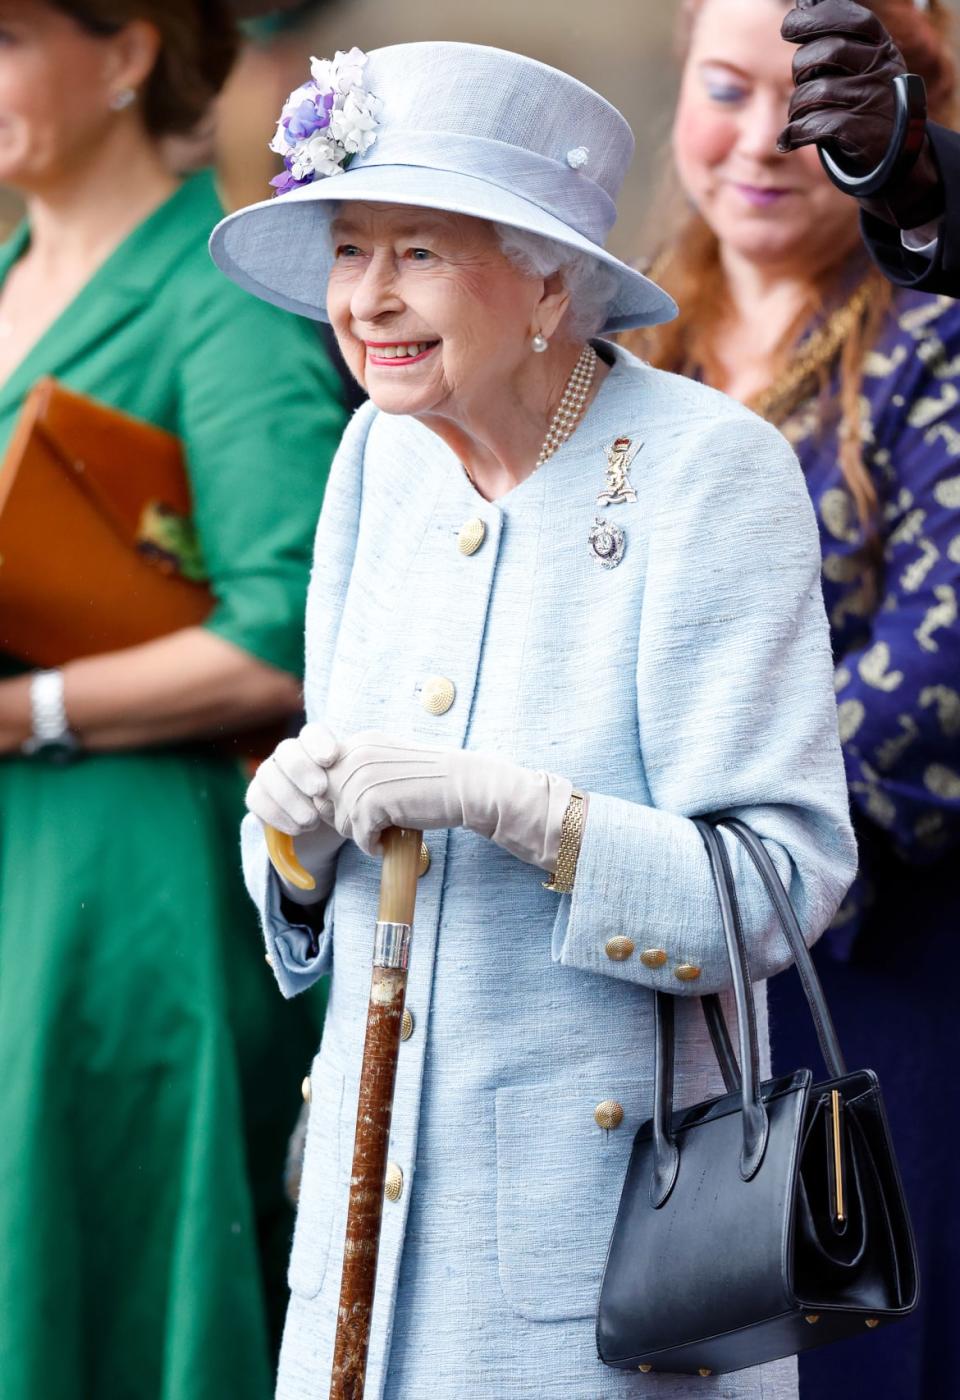 <div class="inline-image__caption"><p>Queen Elizabeth II attends The Ceremony of the Keys on the forecourt of the Palace of Holyrood house on June 27, 2022 in Edinburgh, Scotland. </p></div> <div class="inline-image__credit">Max Mumby/Indigo/Getty </div>